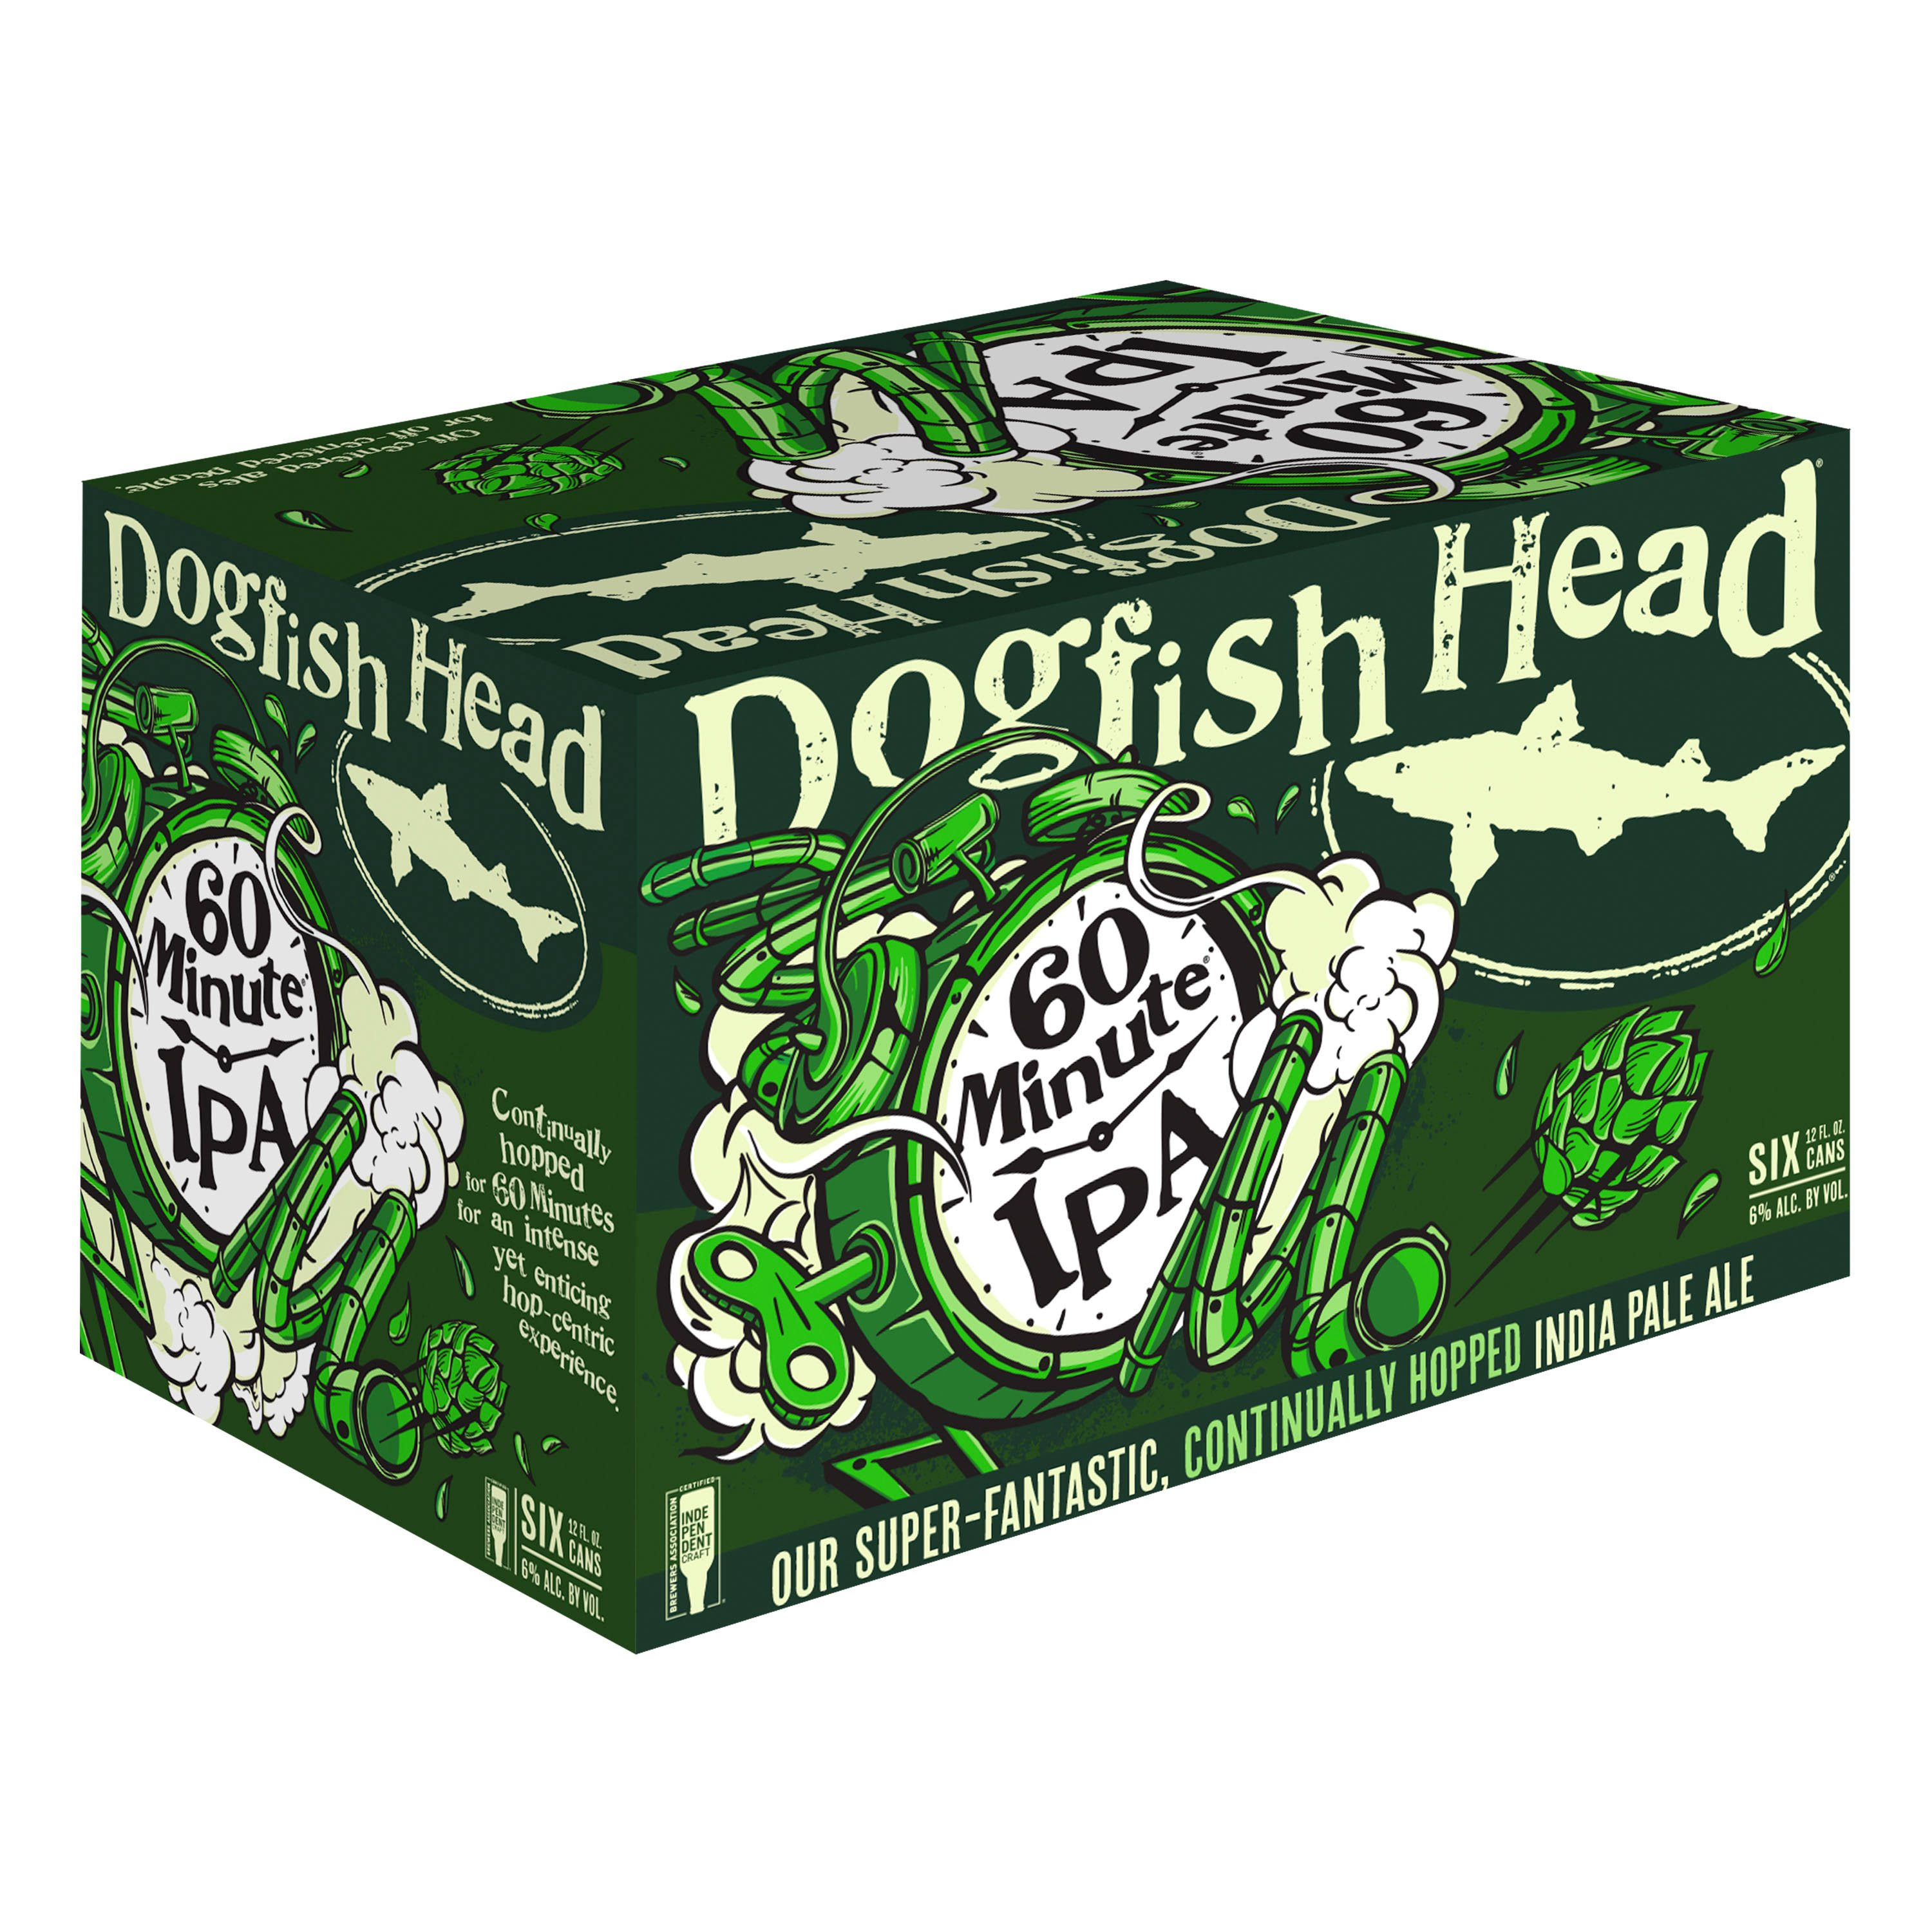 Dogfish Head Beer, 60 Minute IPA, 6 Pack - 6 pack, 12 fl oz cans